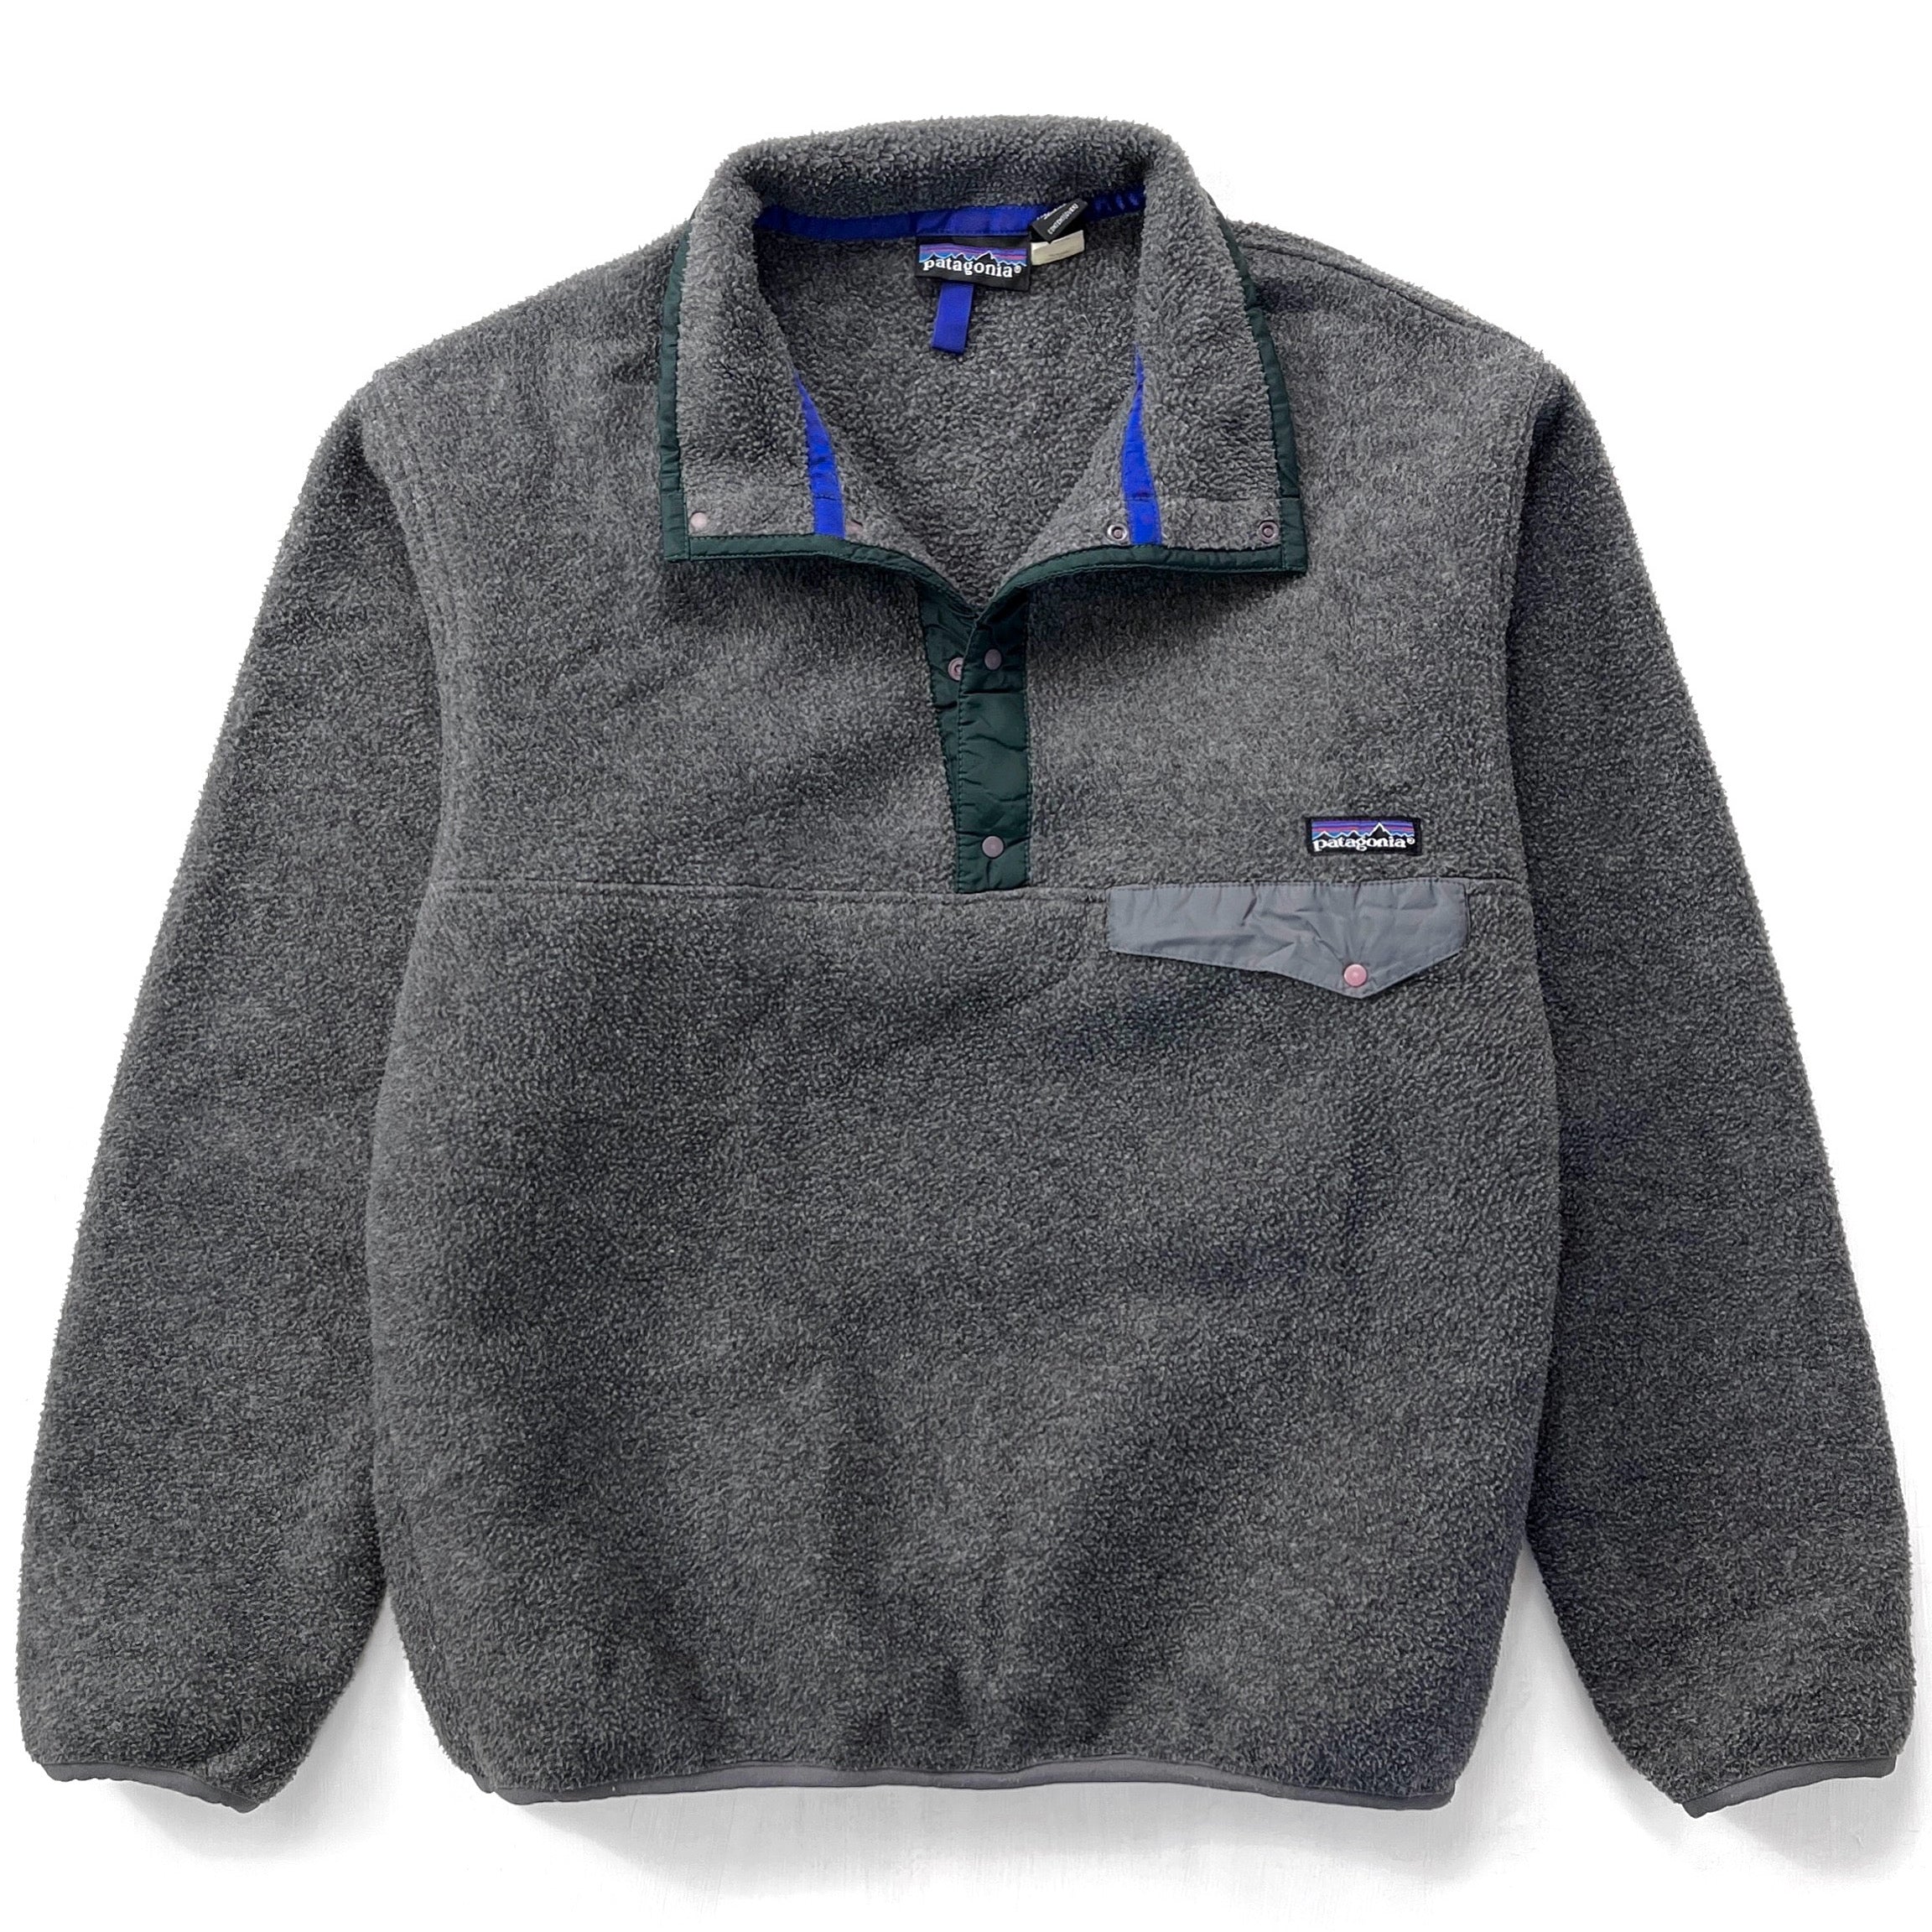 1992 Patagonia Synchilla Snap-T Pullover, Charcoal & Hunter (M)